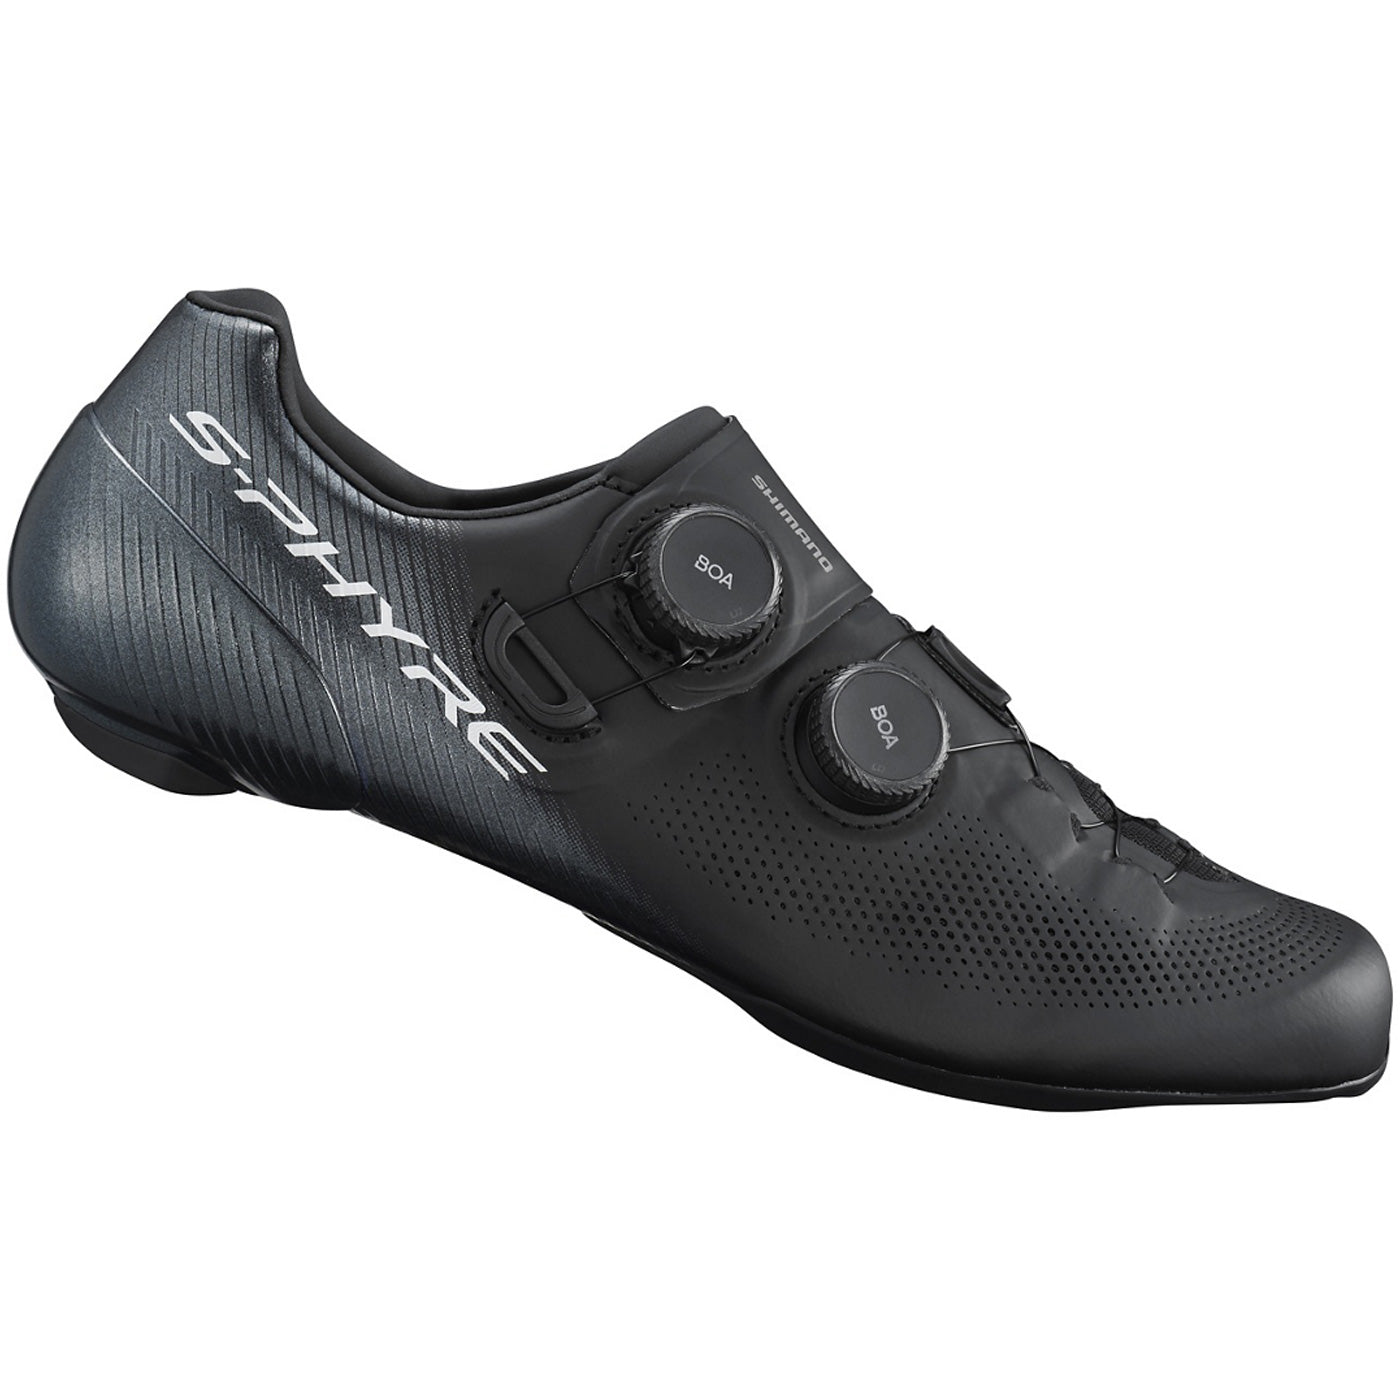 Shimano S-Phyre RC903 shoes - Black